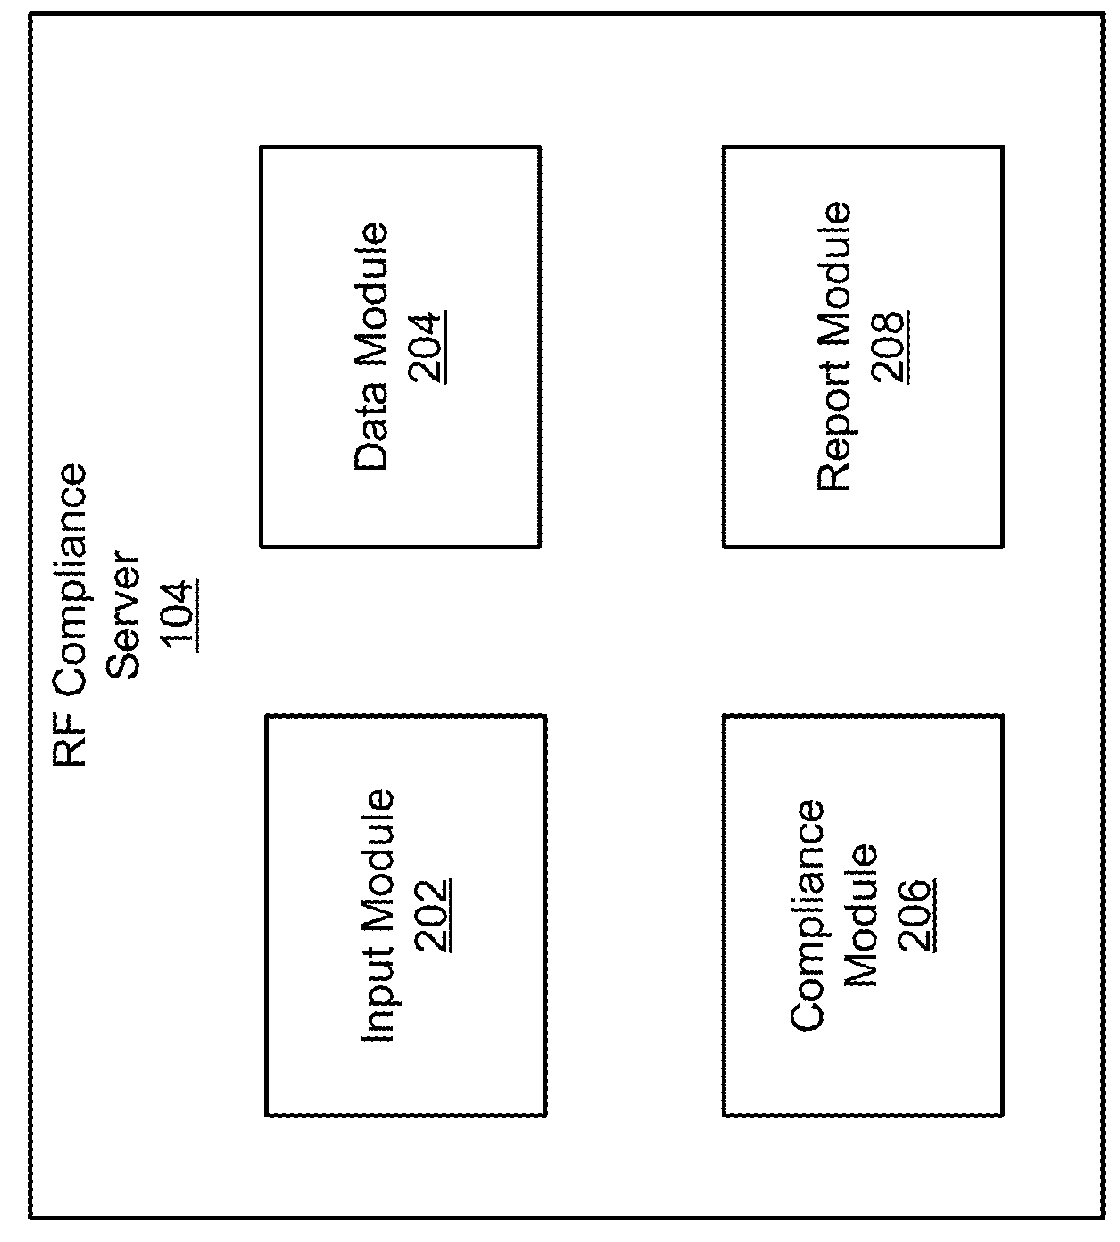 Systems and methods for analyzing radio frequency exposure compliance